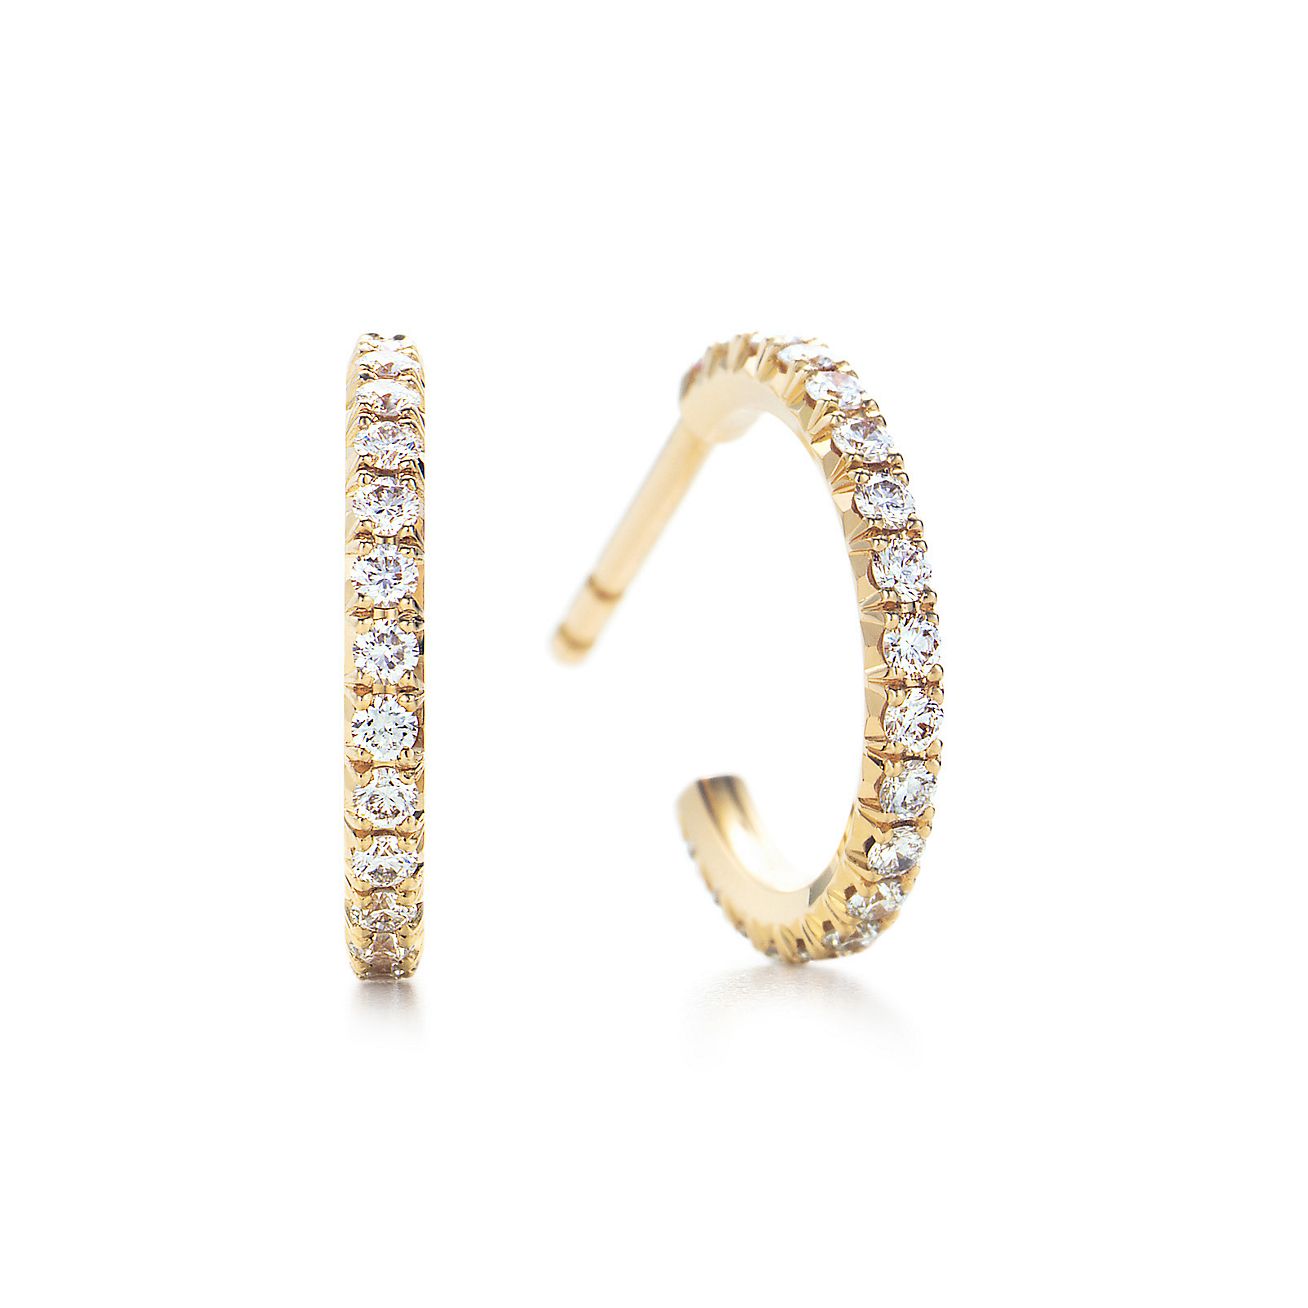 Tiffany Metro Hoop Earrings in 18K White Gold with Diamonds, Small, Size: Small